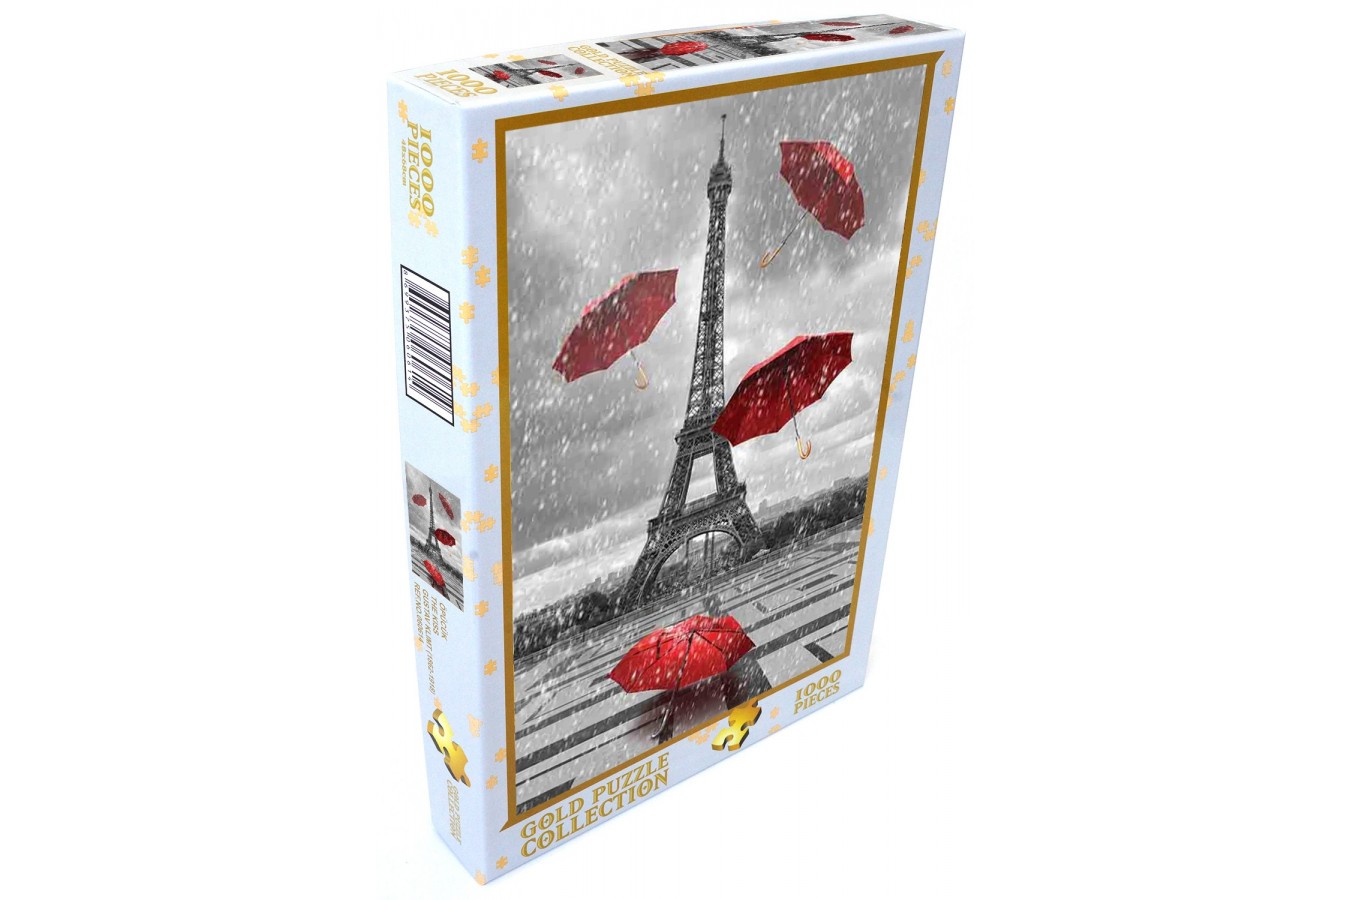 Puzzle Gold Puzzle - Eiffel Tower with Flying Umbrellas, 1000 piese alb-negru (Gold-Puzzle-61383)